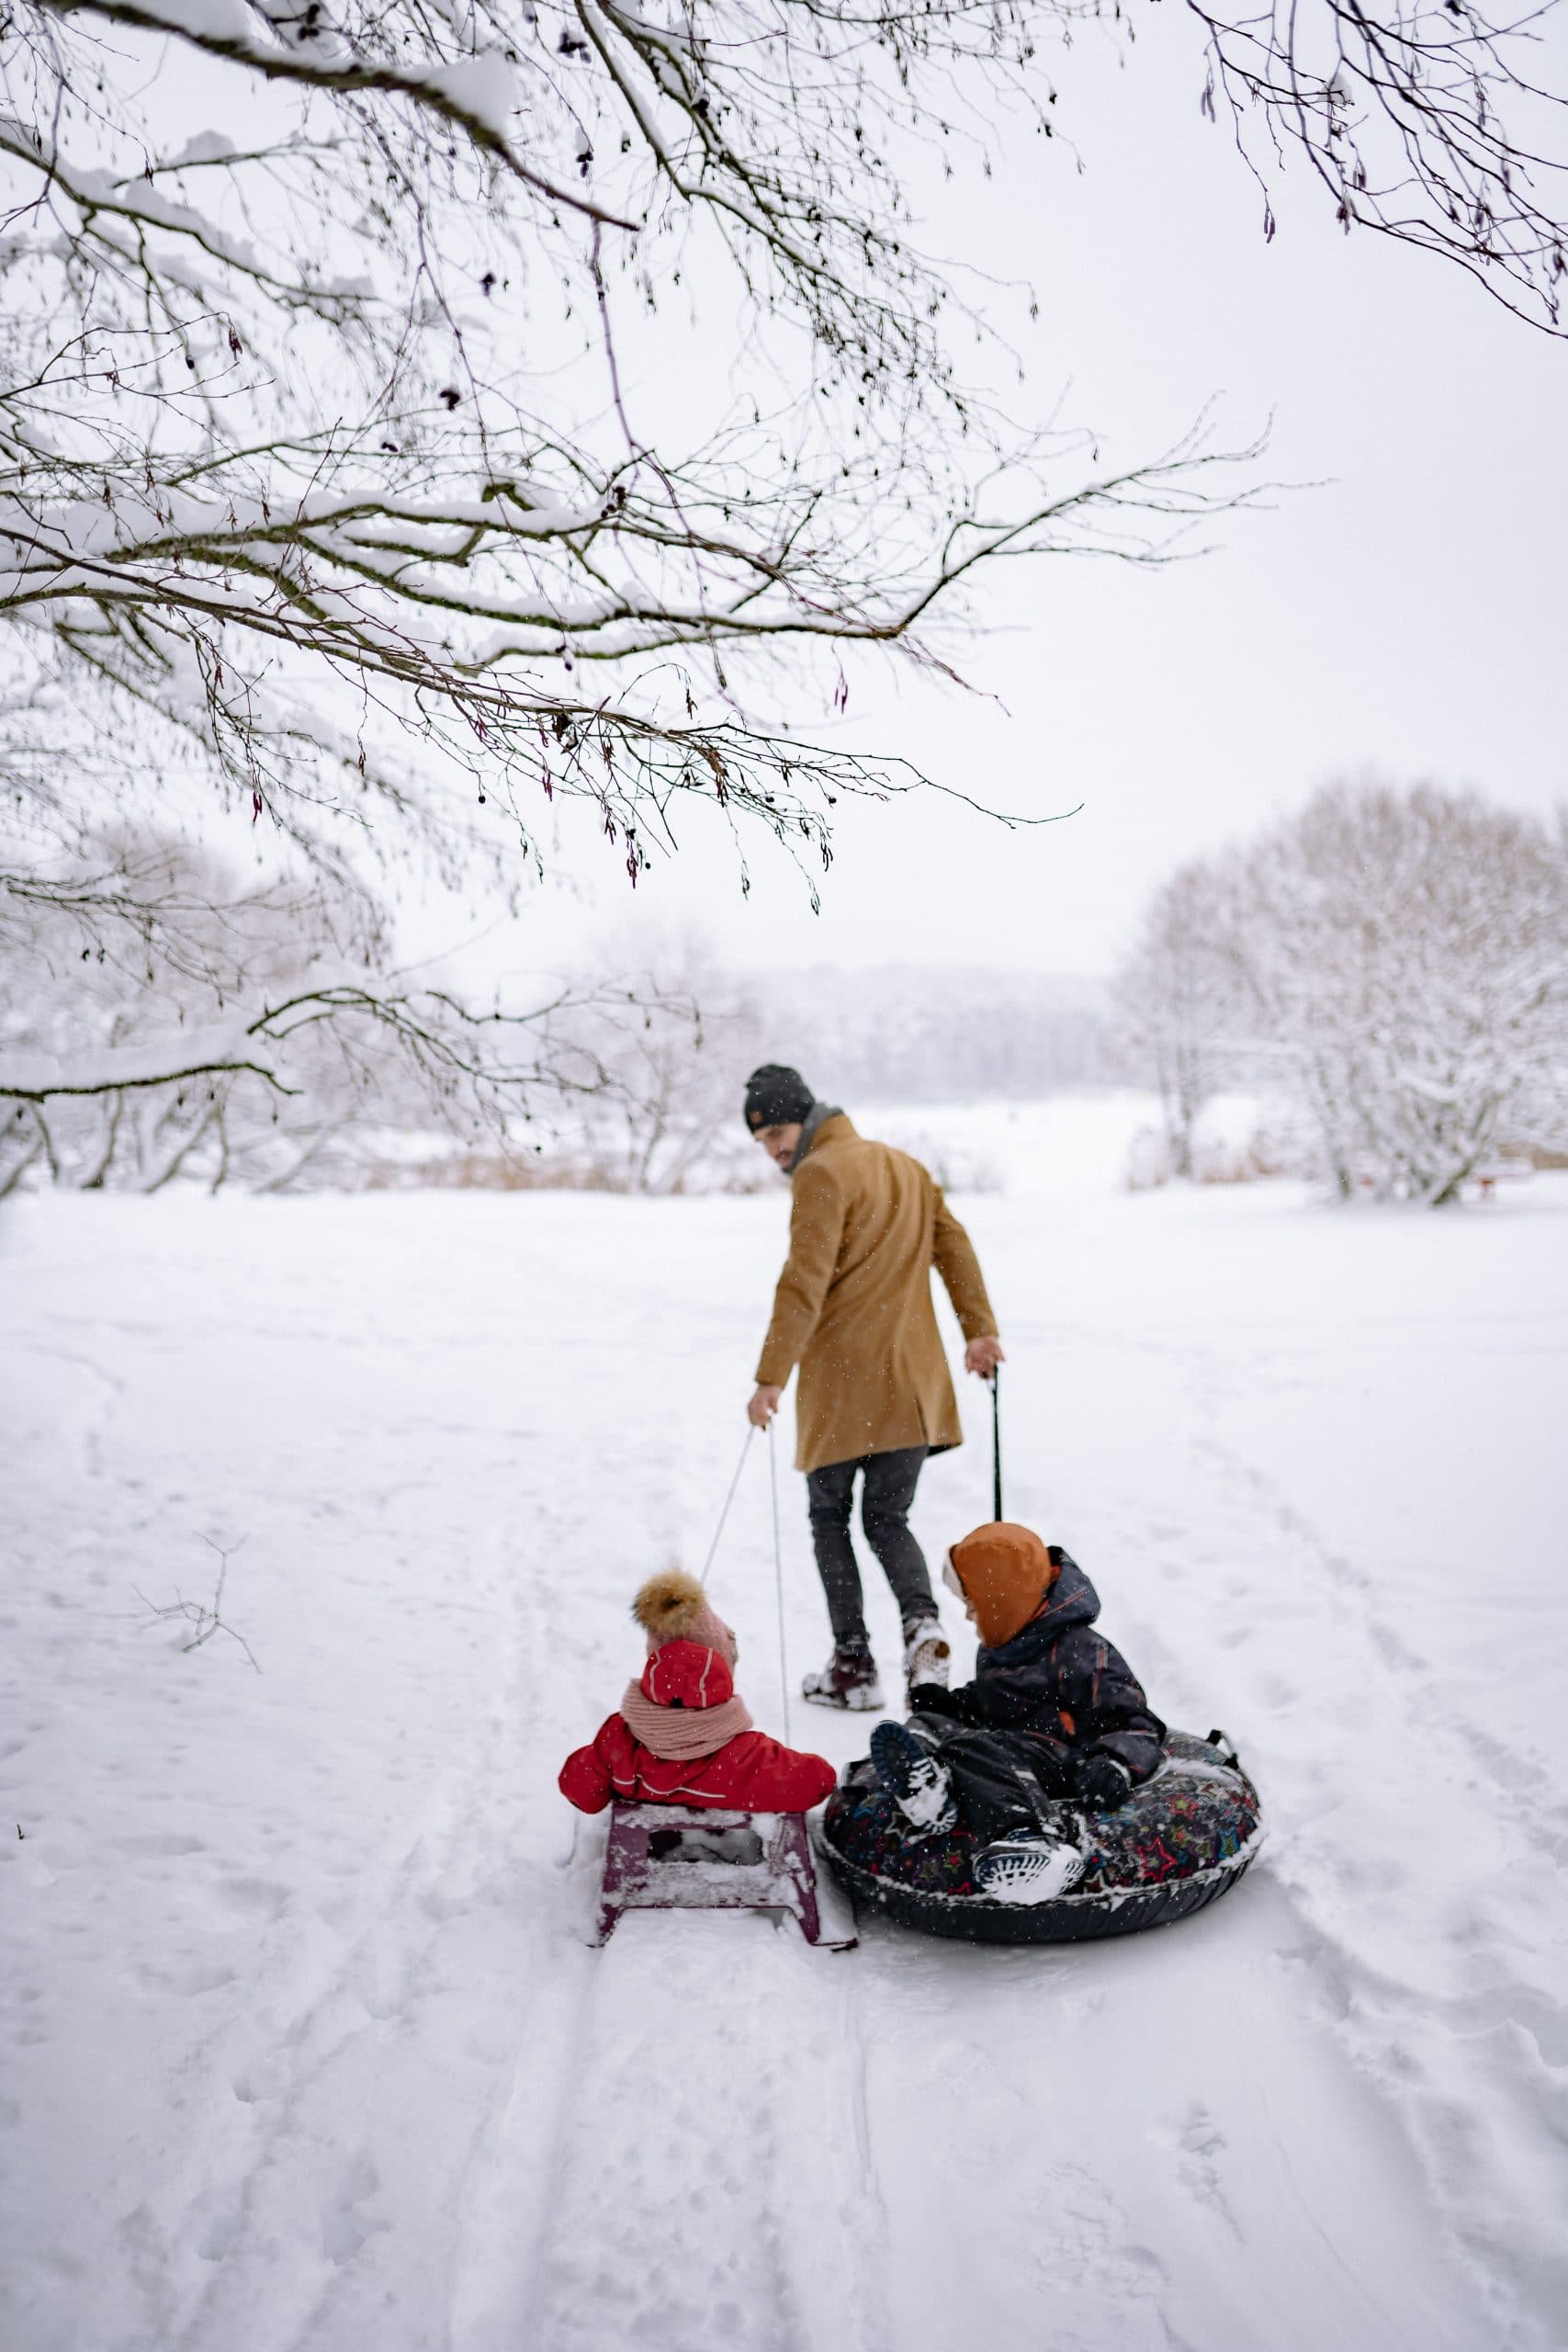 Two children being pulled on sleds by a man through a snowy forest (Ohio Sledding Hills)